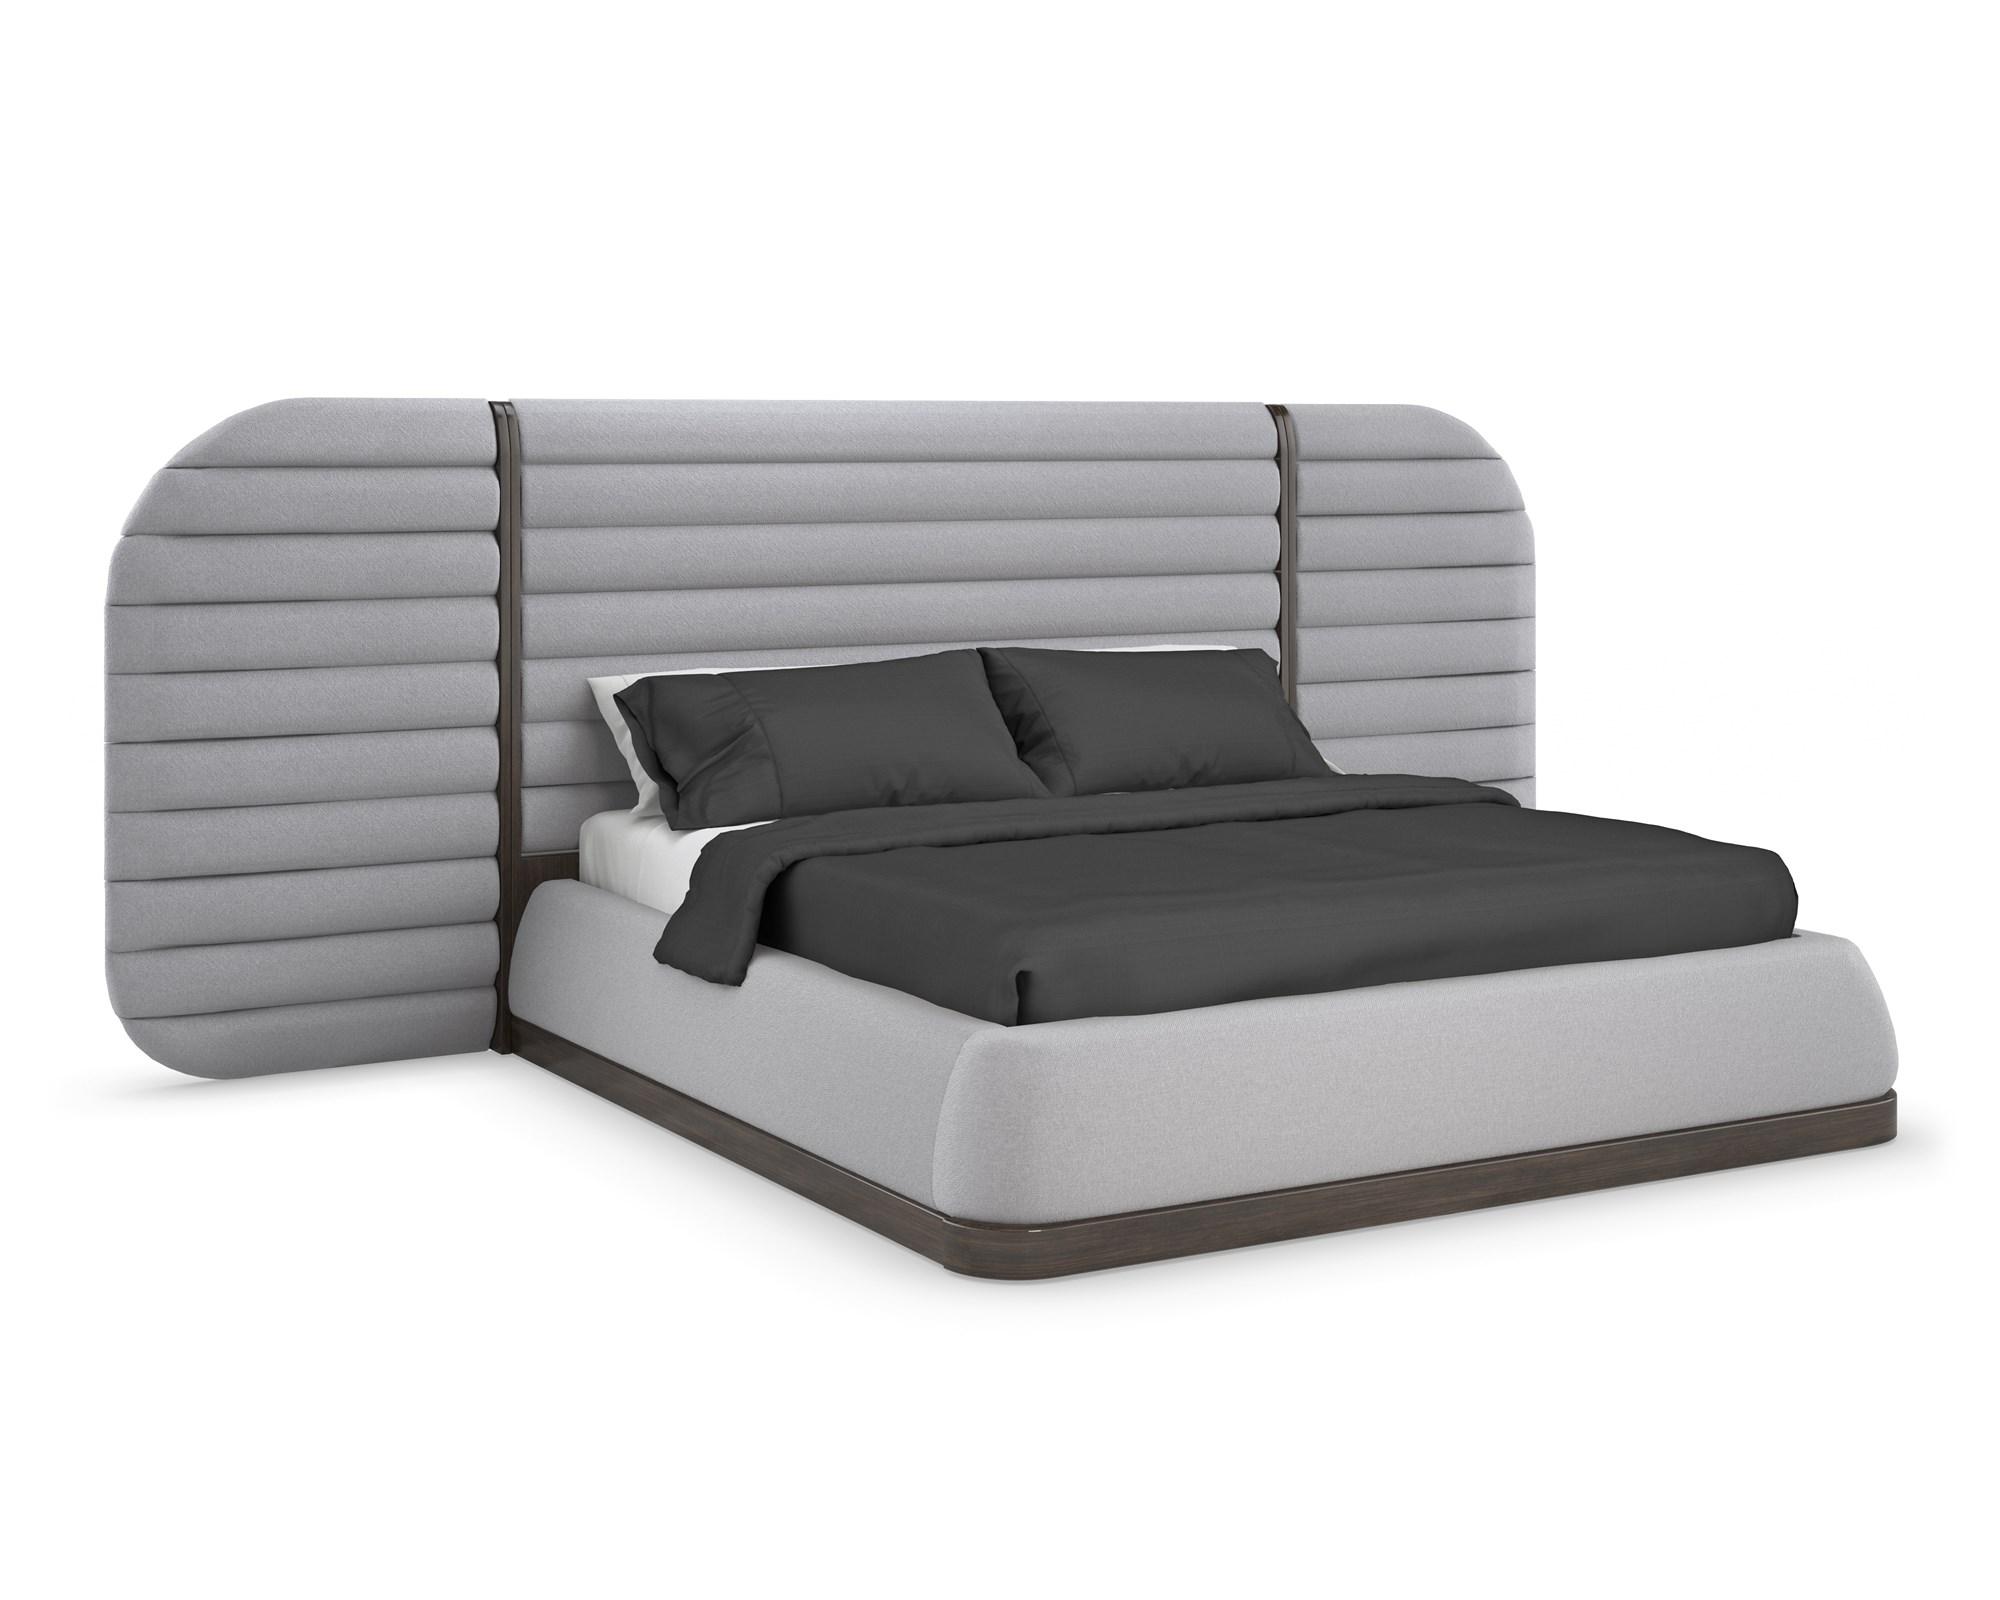 

    
Pebble Gray Billiard Cloth Fabric King Size LA MODA UPH PANEL BED with Side Panels by Caracole
